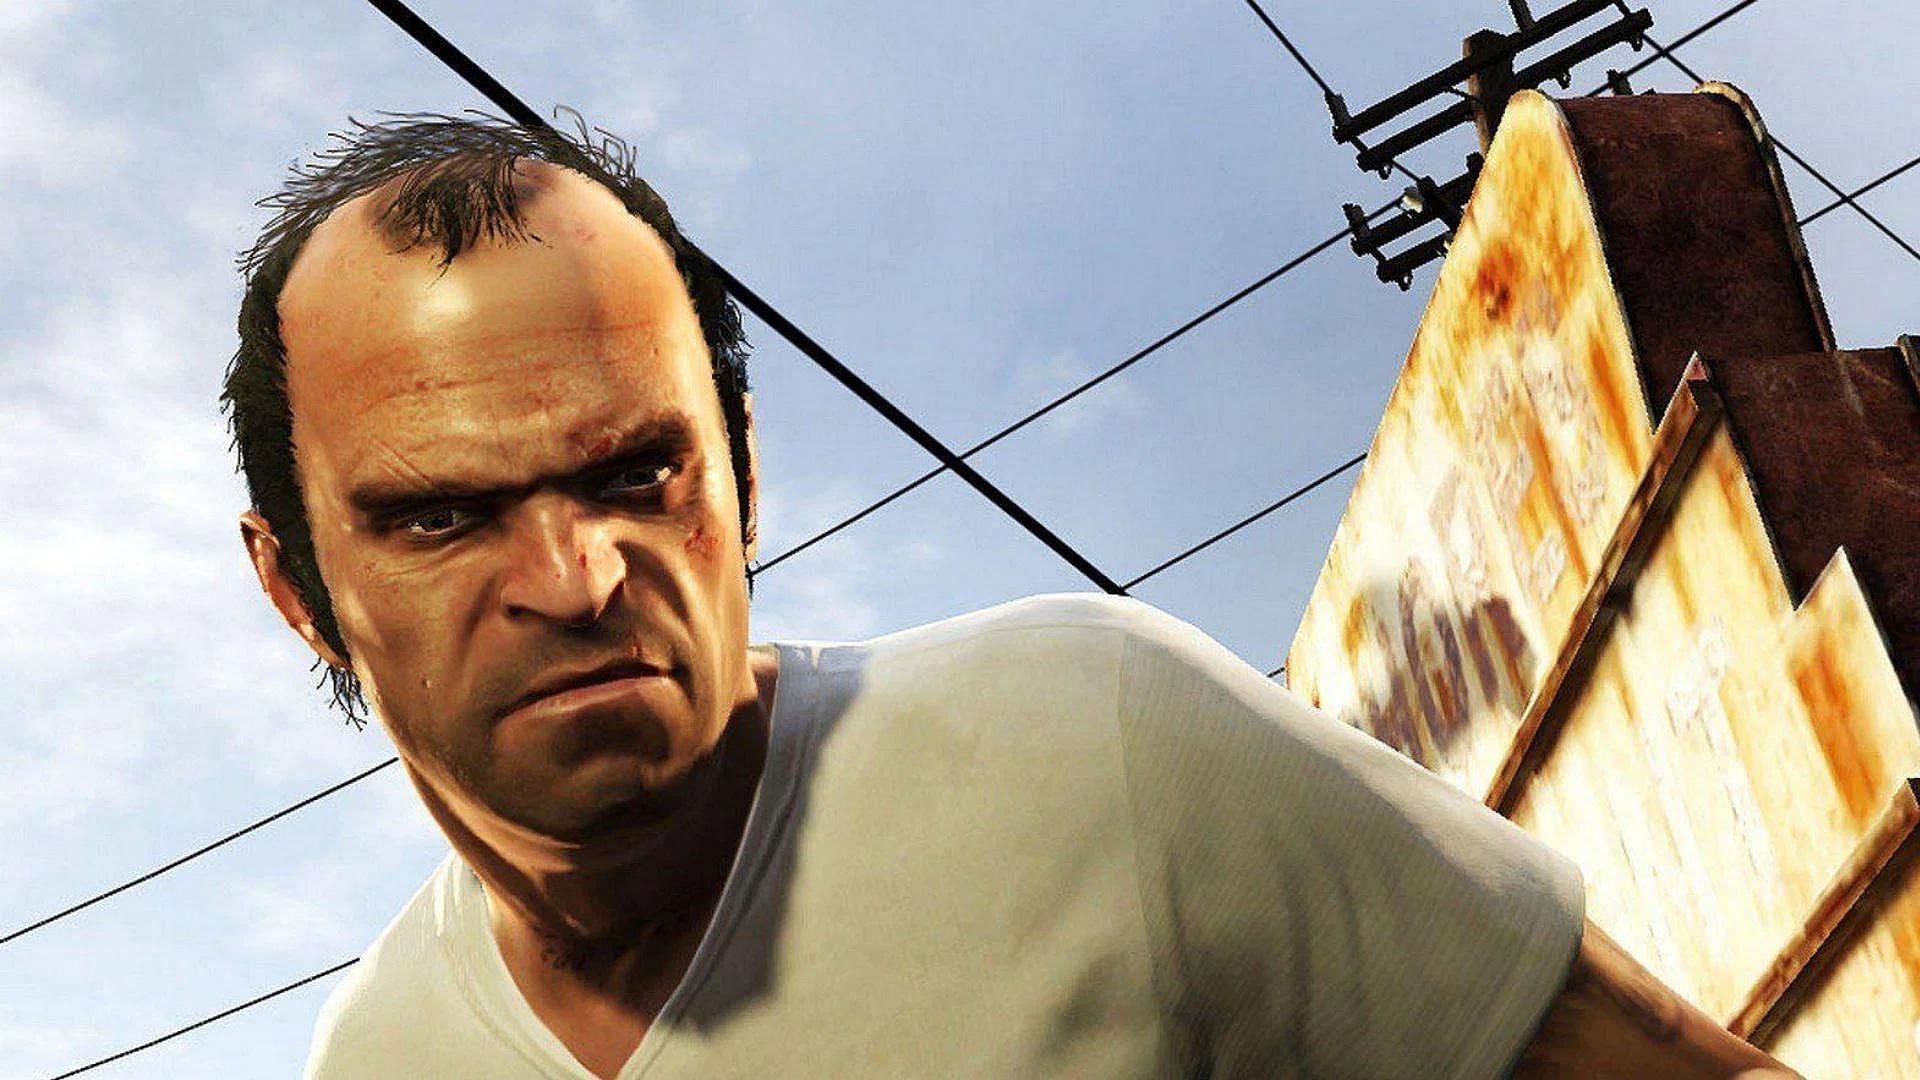 GTA protagonists ranked according to ruthlessness